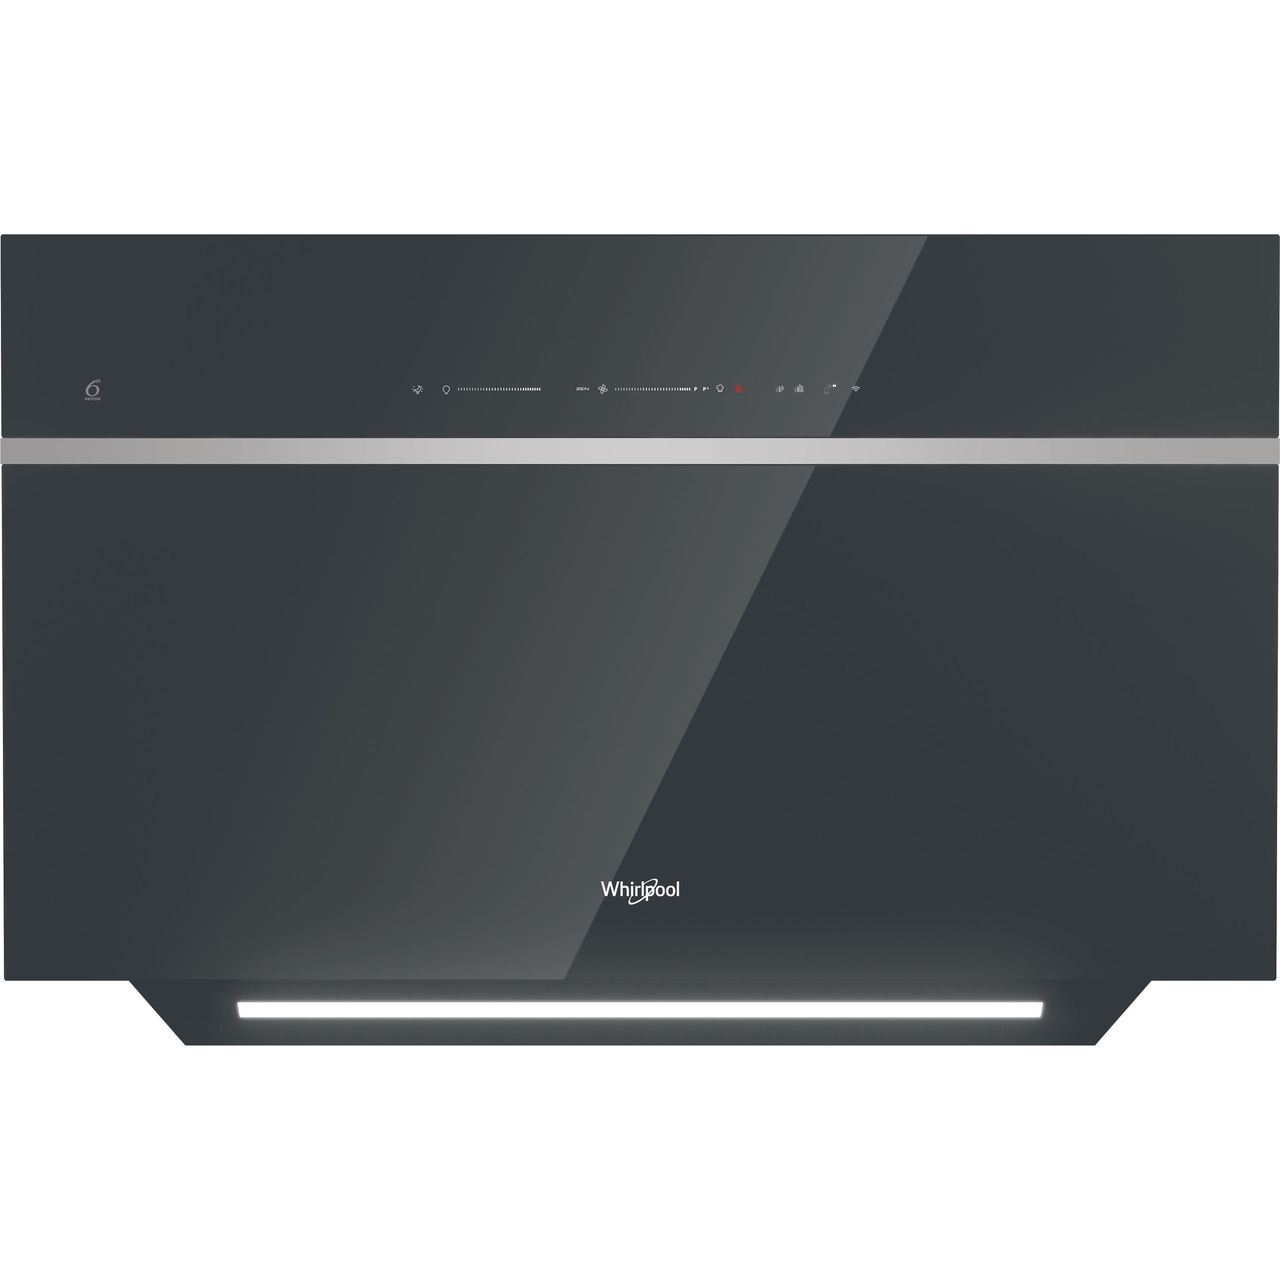 Whirlpool W Collection WHVS90FLTCK Wifi Connected 90 cm Angled Chimney Cooker Hood Review